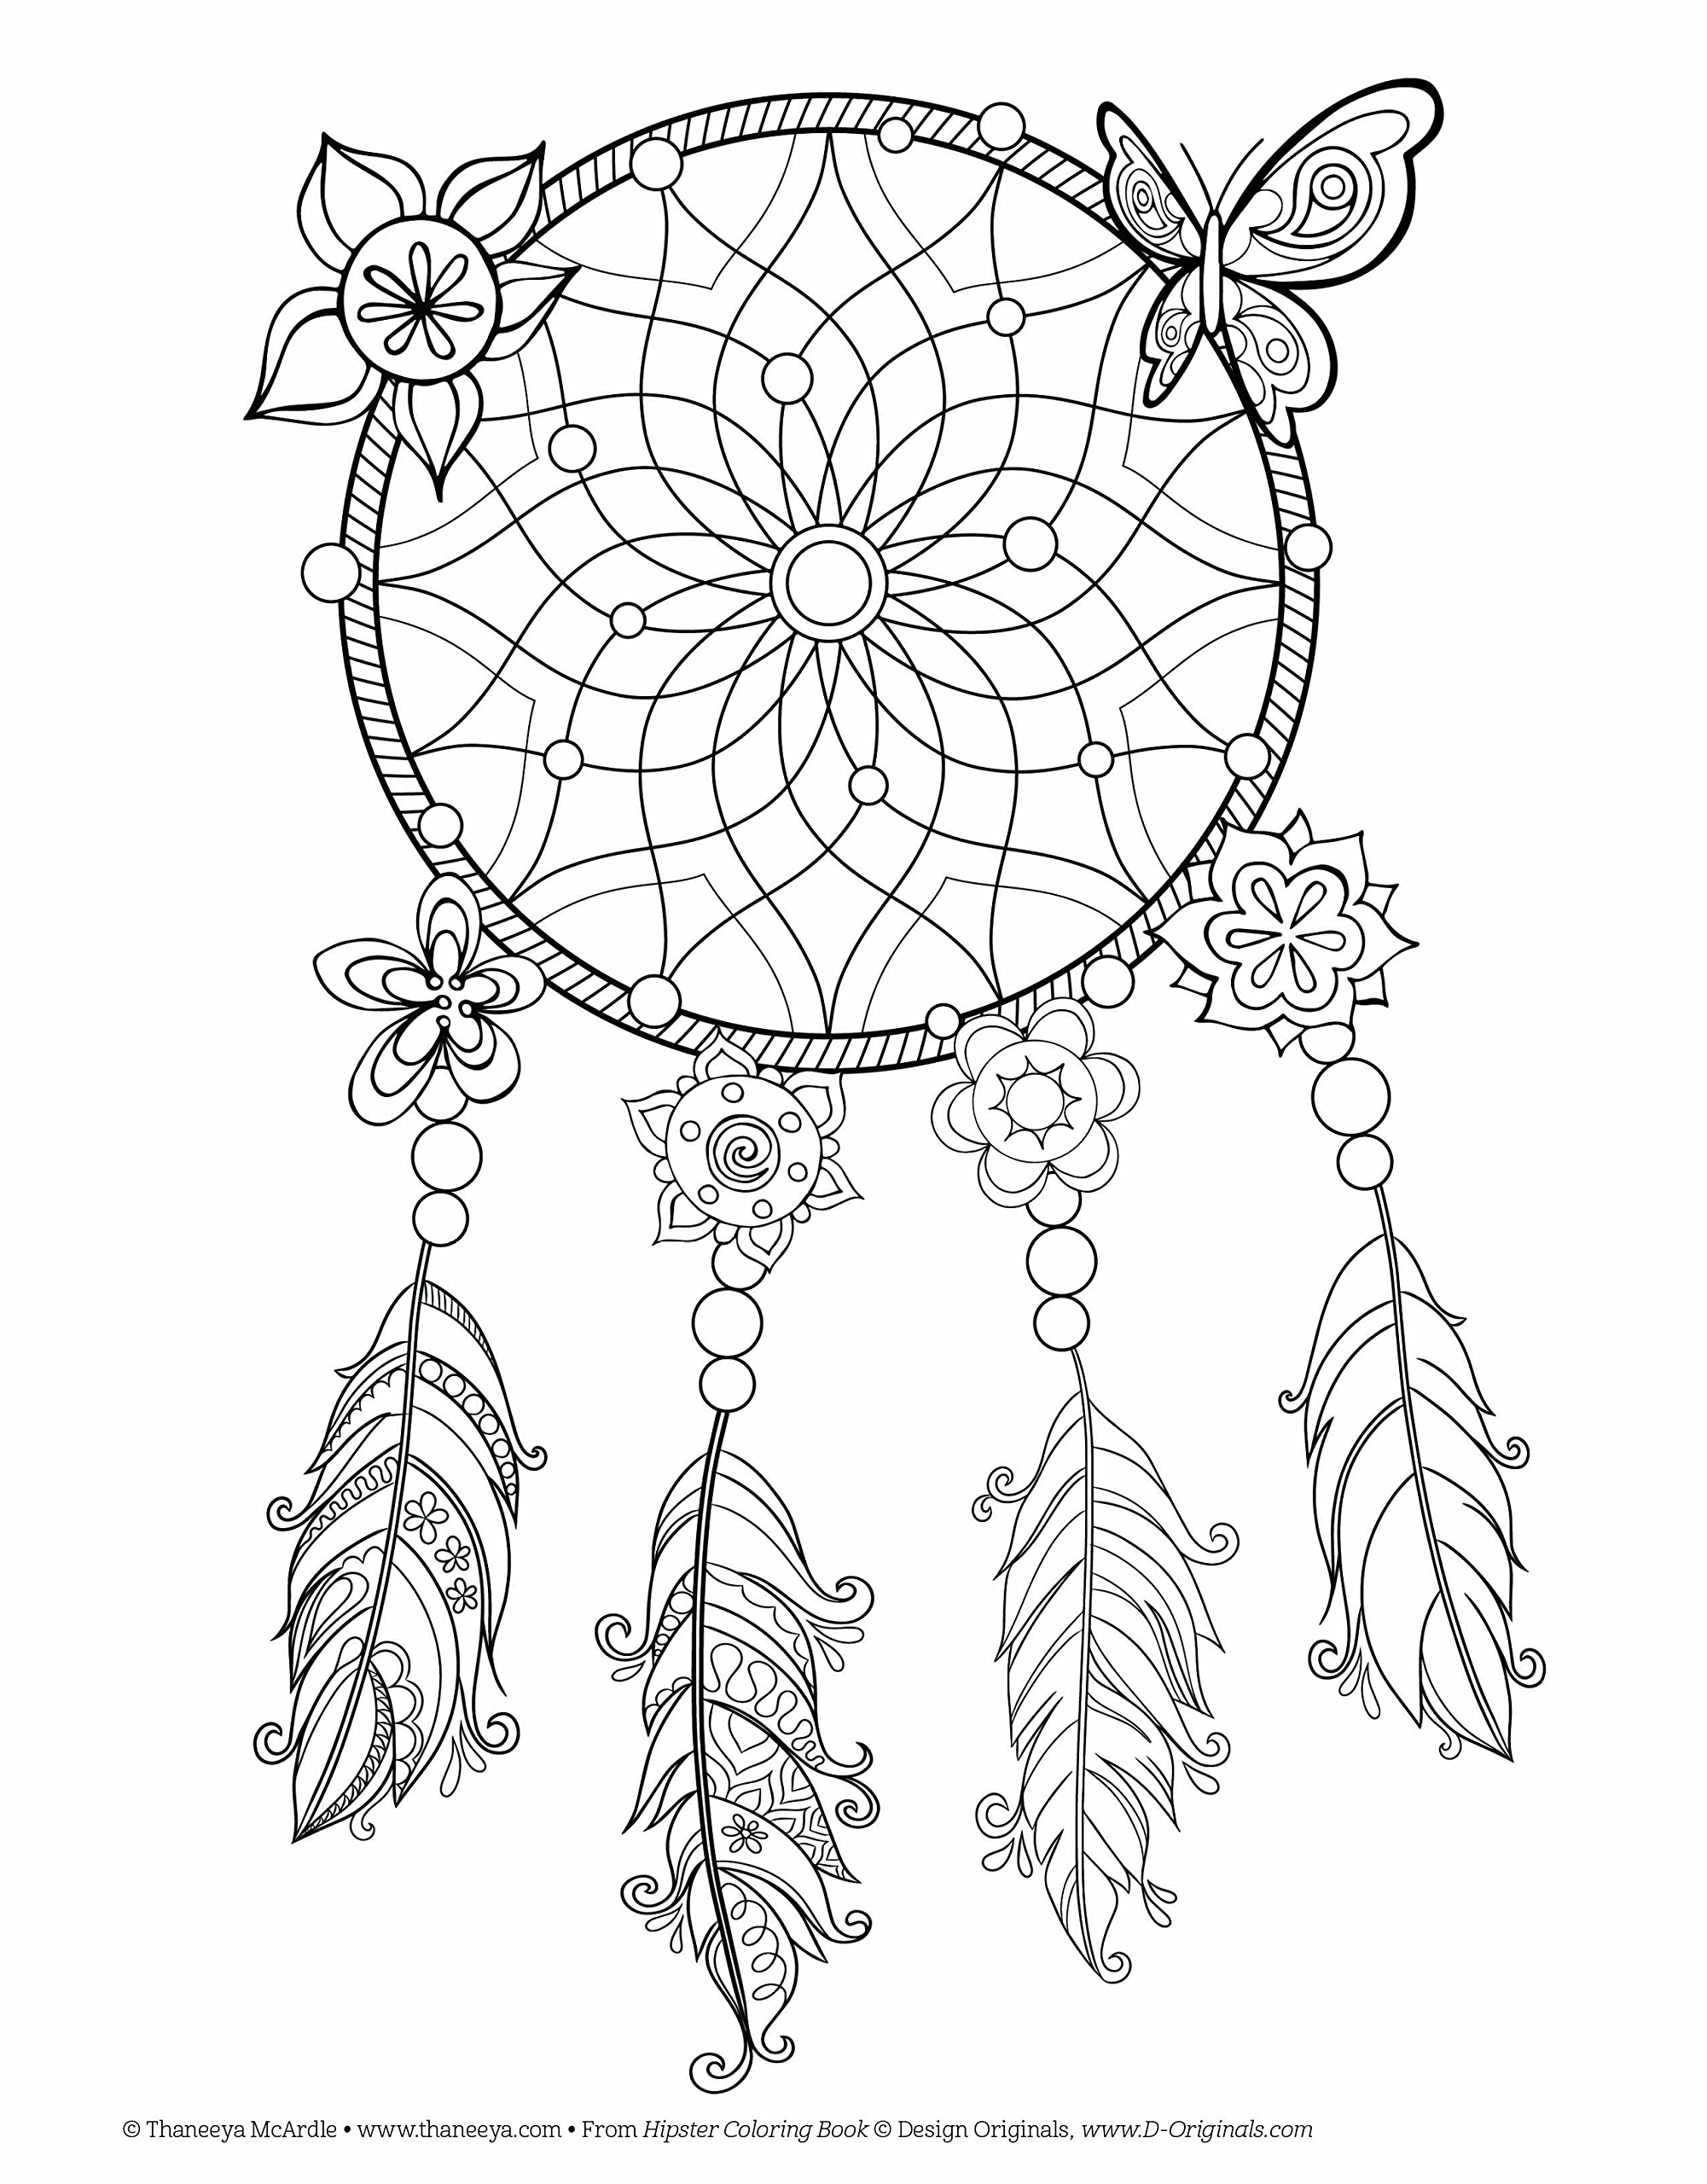 Coloring Pages : Phenomenal Free Coloring Book Pages Printable For ...